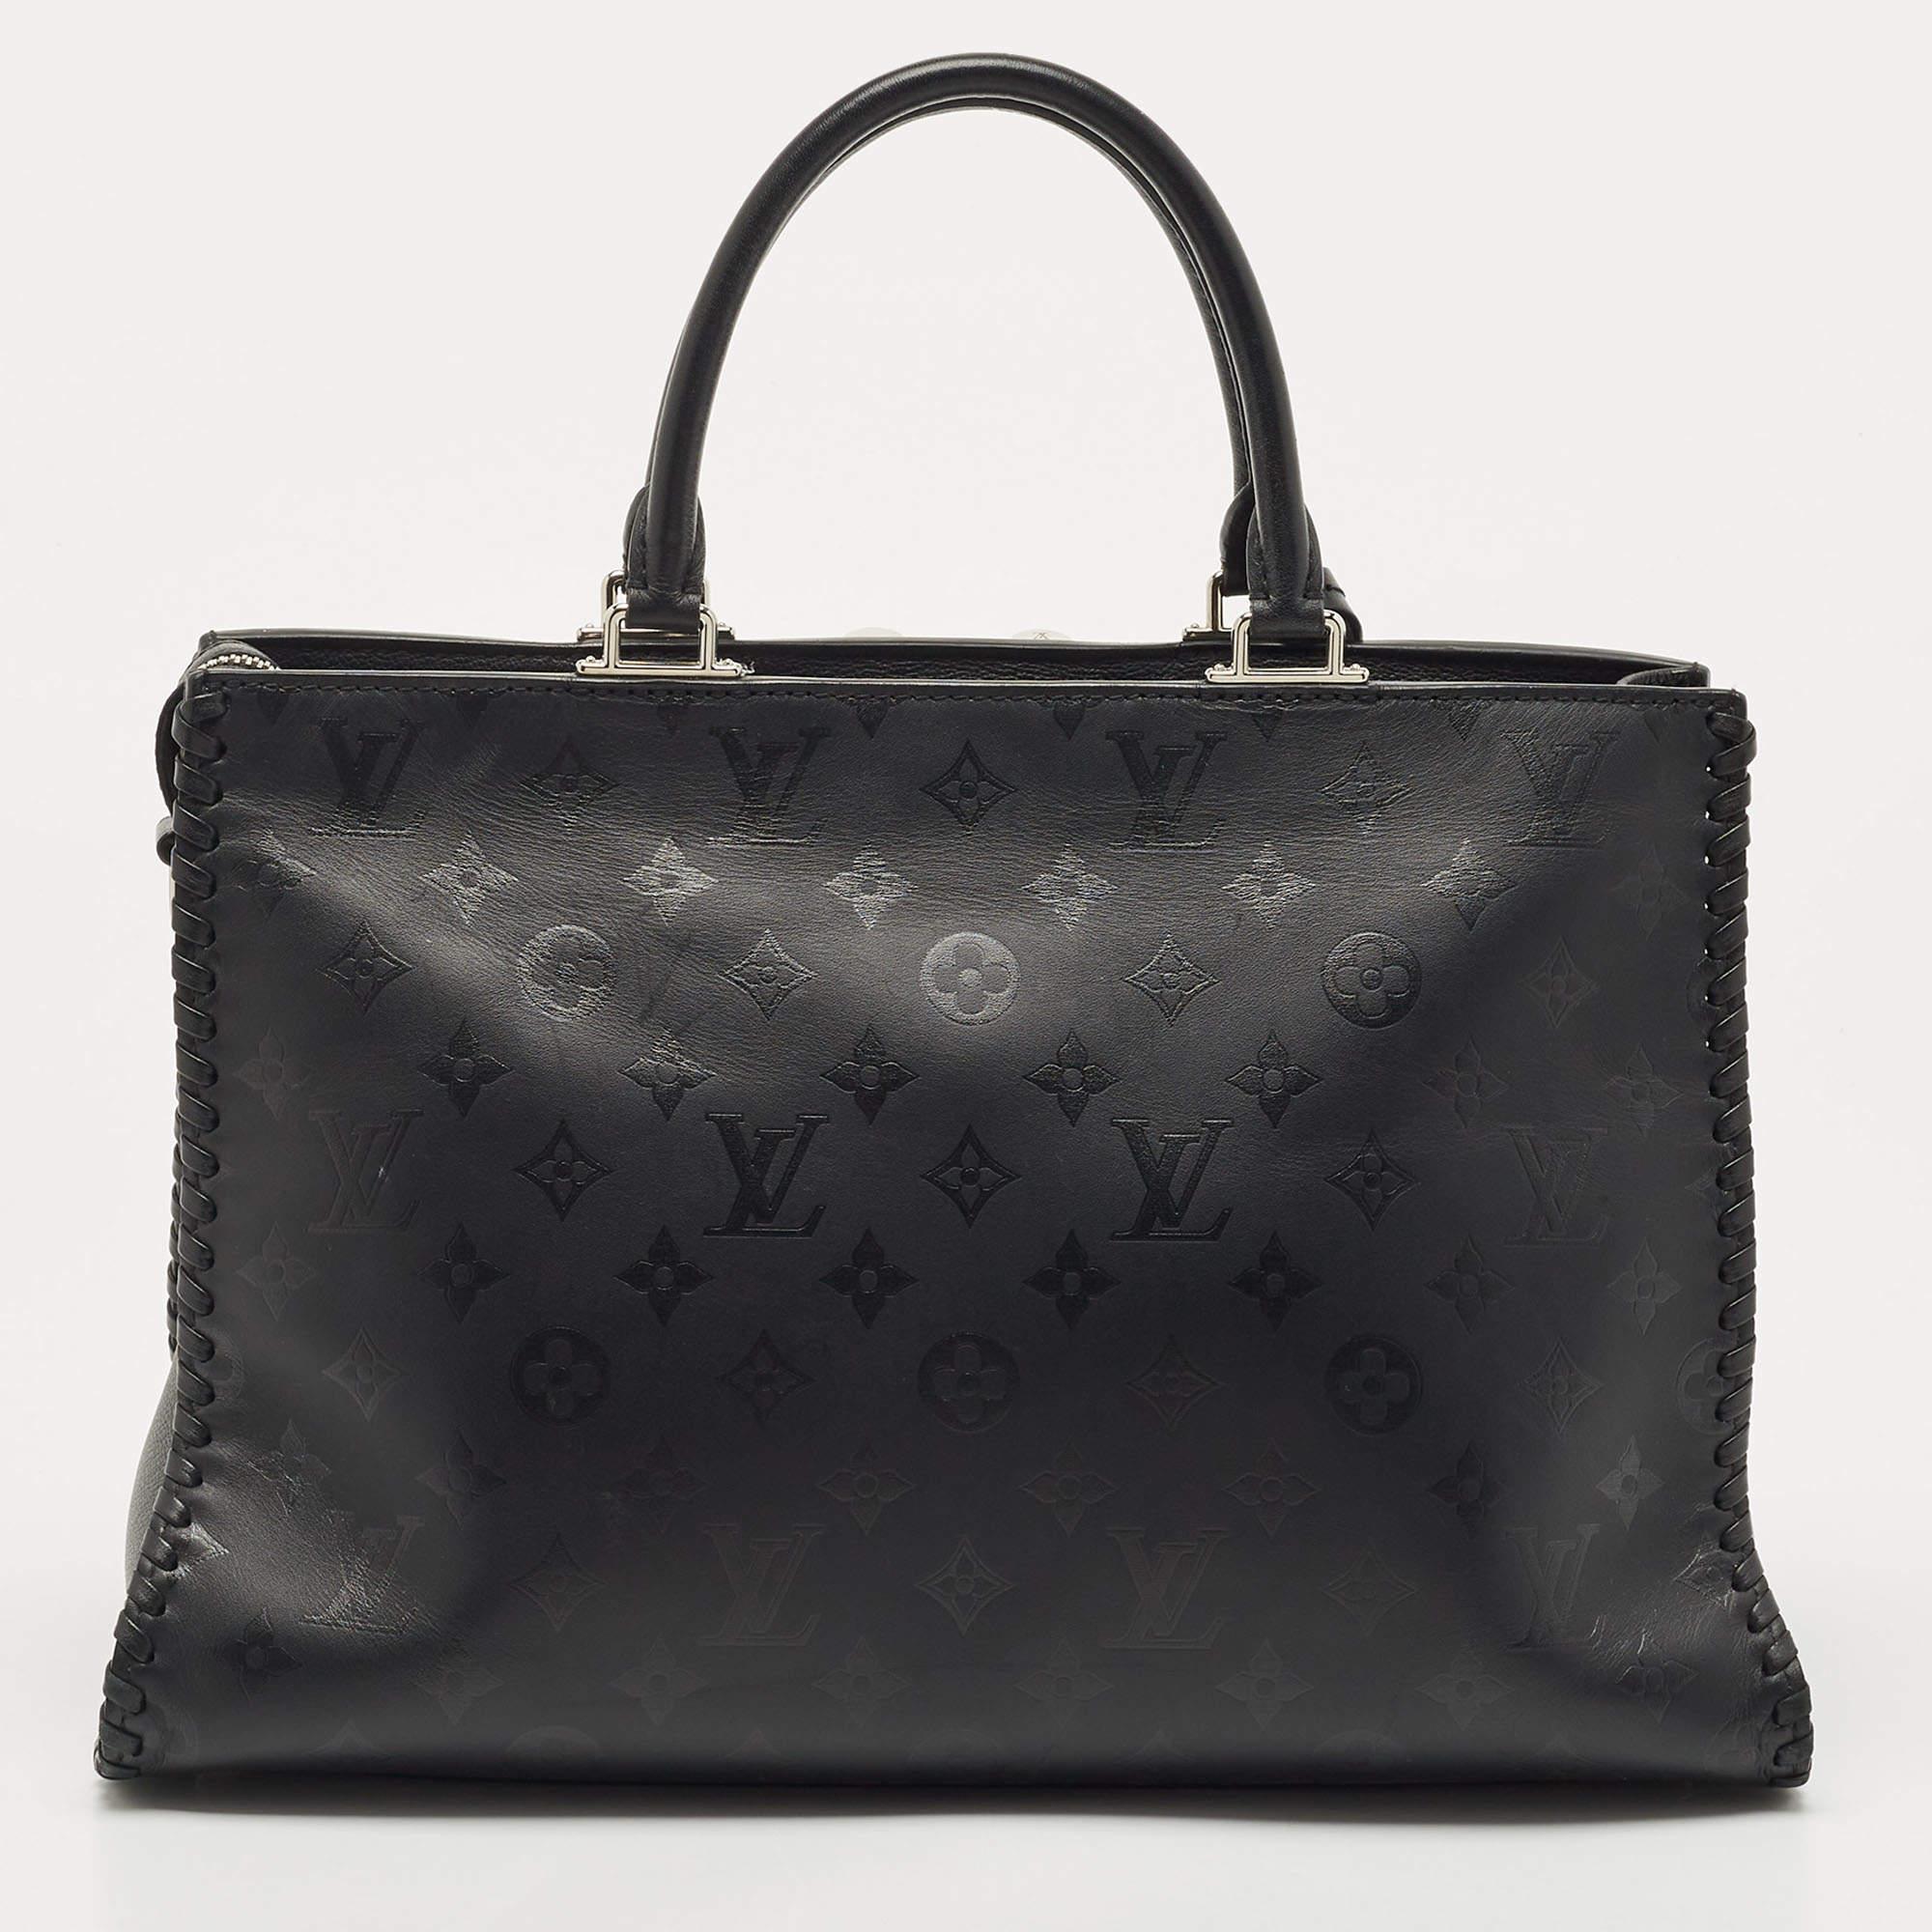 This handbag from the house of Louis Vuitton is an accessory you would go to season after season. It has been crafted using the best kind of materials to be appealing as well as durable. It's a worthy investment.

Includes: Info Booklet, Lock and